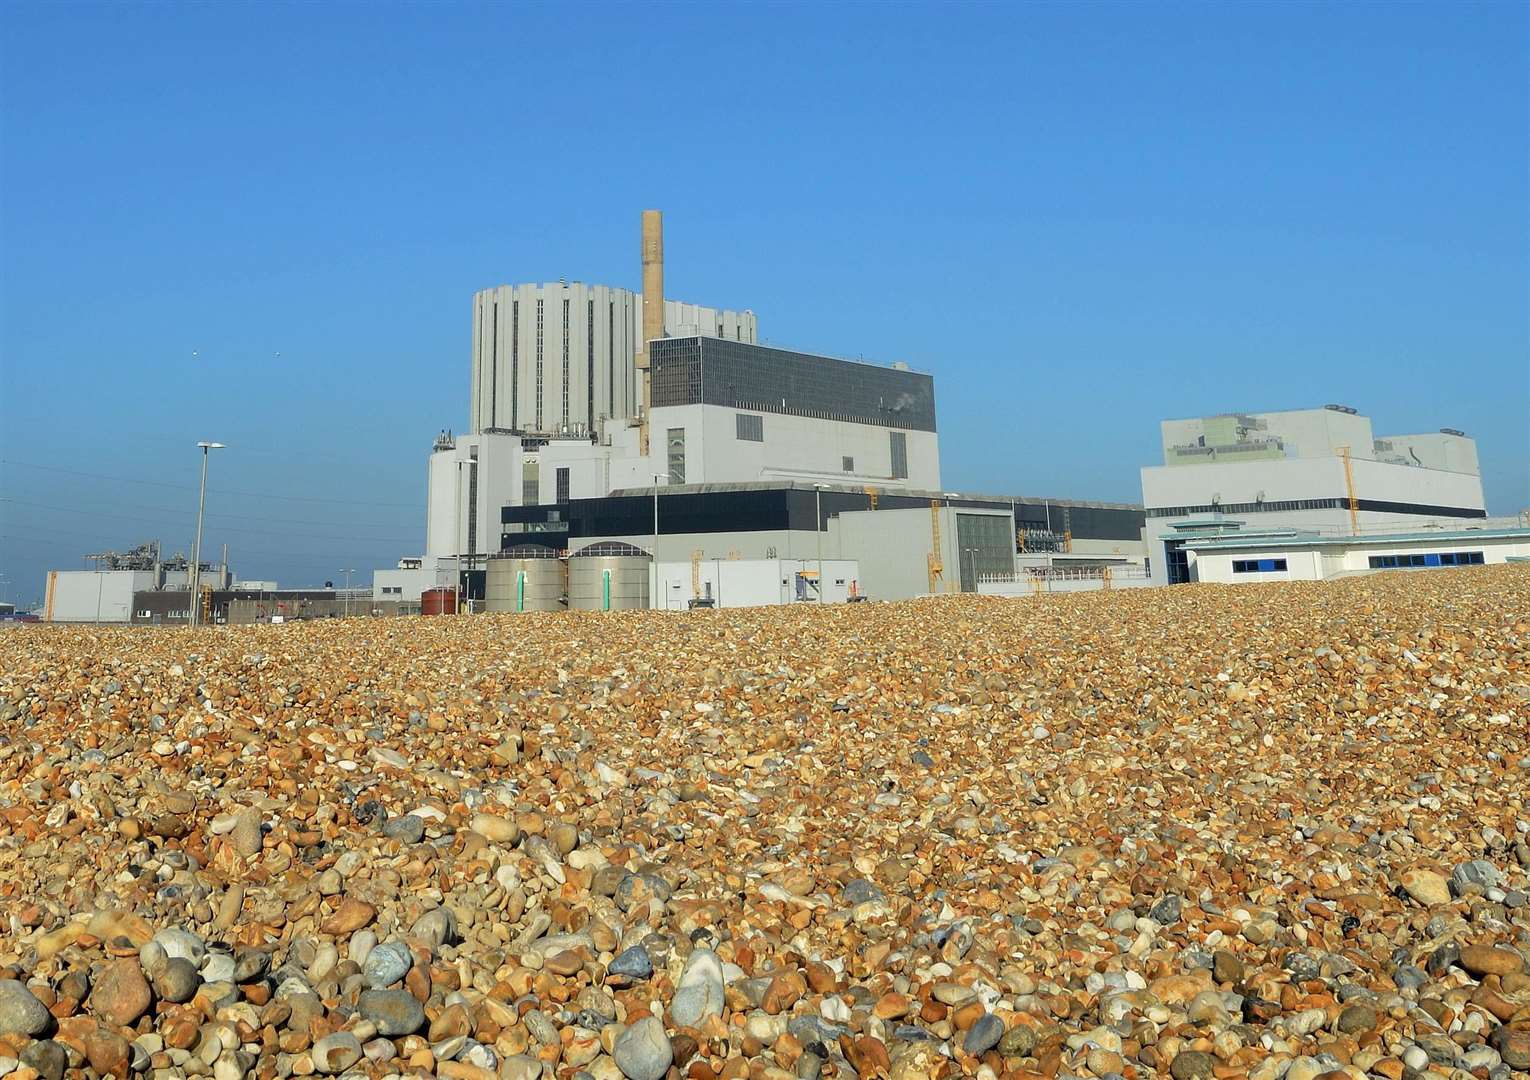 Dungeness power station defines the local landscape